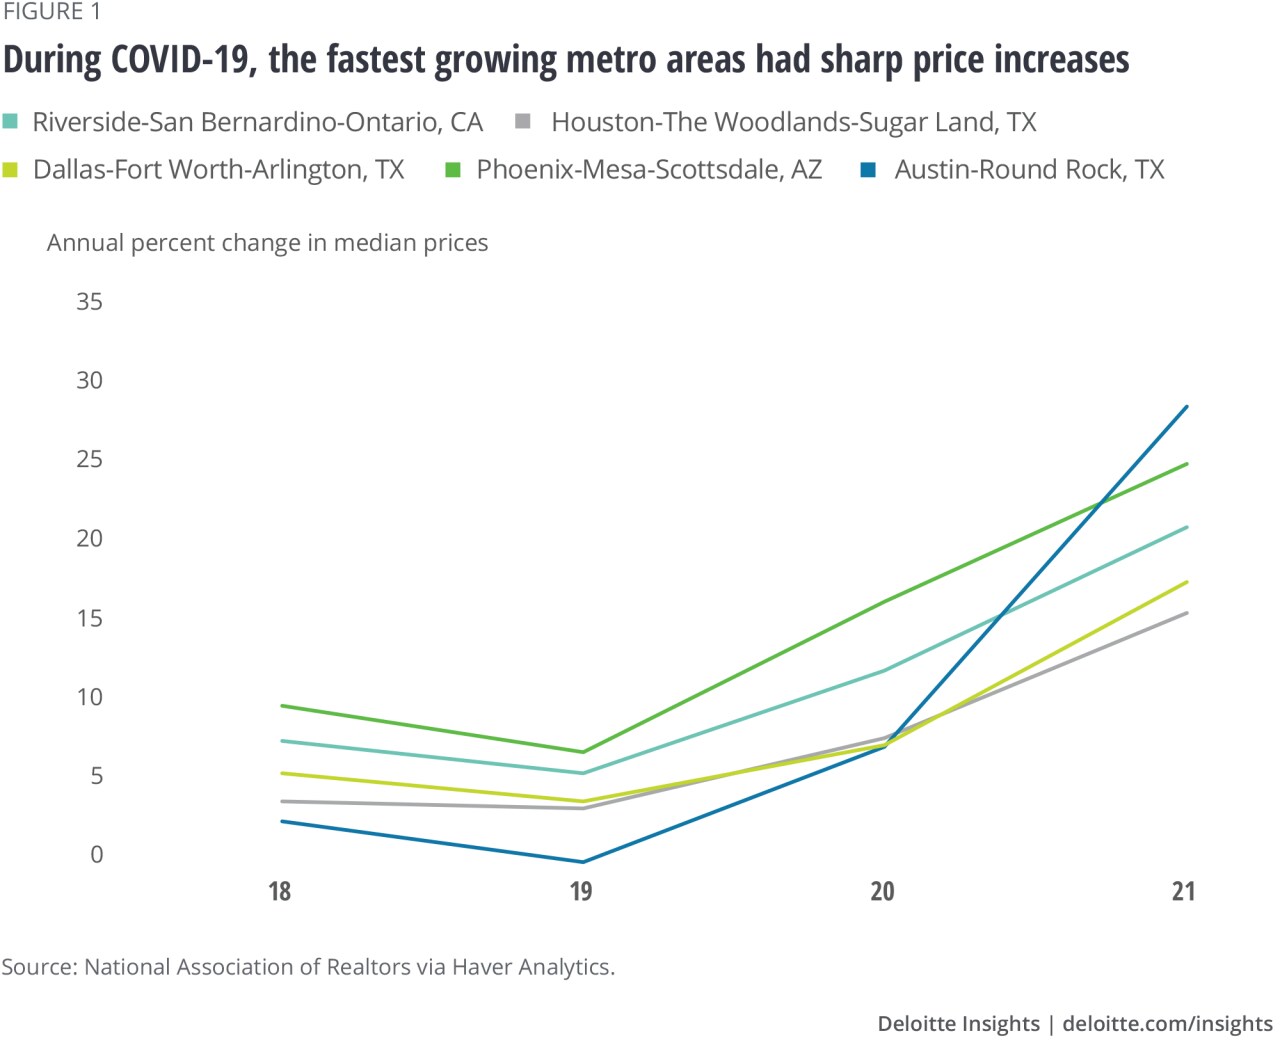 Figure 1: During Covid the fastest growing metro areas had sharp price increases